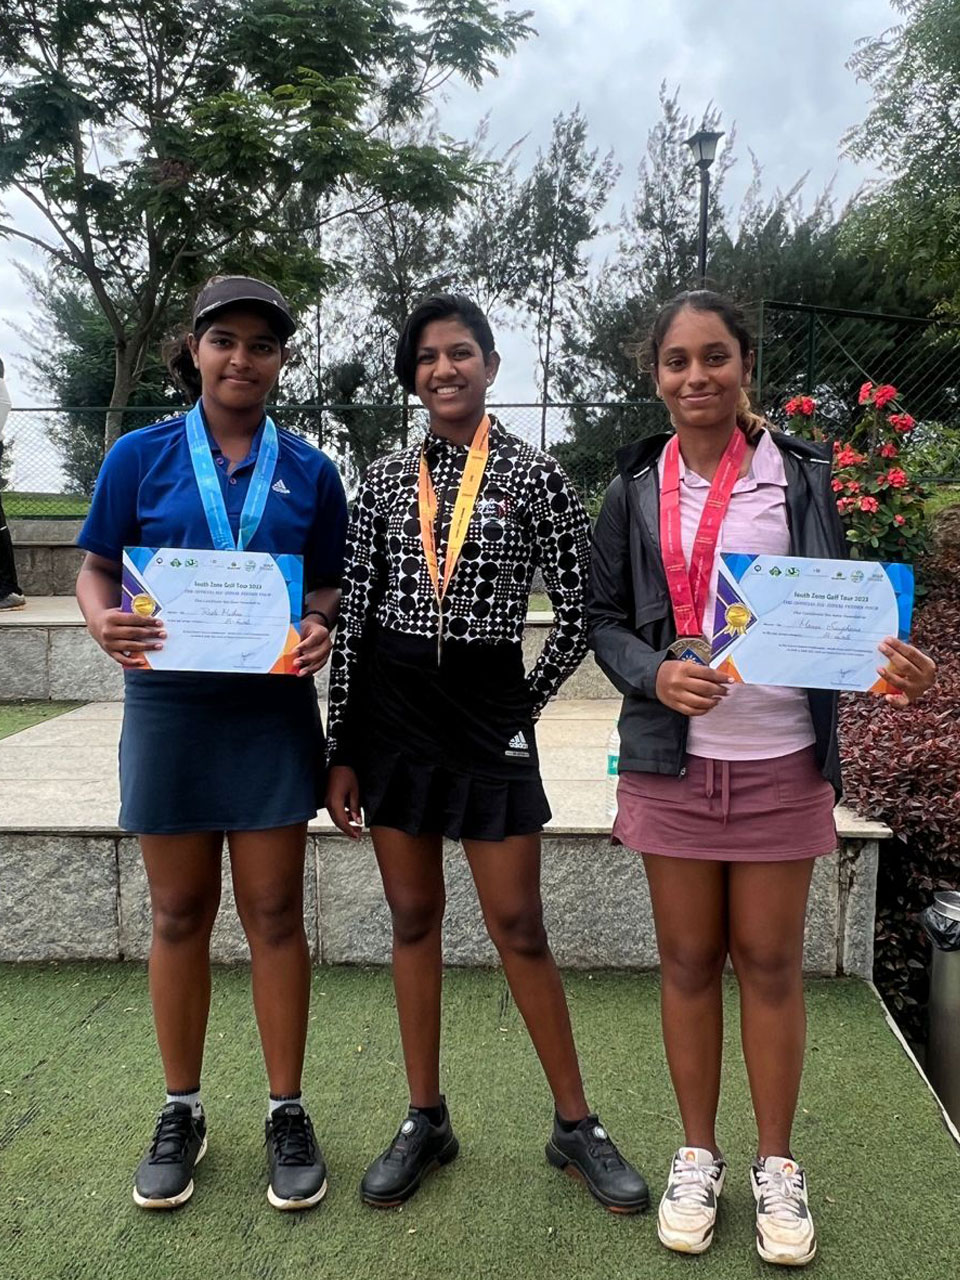 Dia Cris Kumar, Rashi Mishra And Manvi Singhania finished 1st, 2nd and 3rd respectively in Category B girls